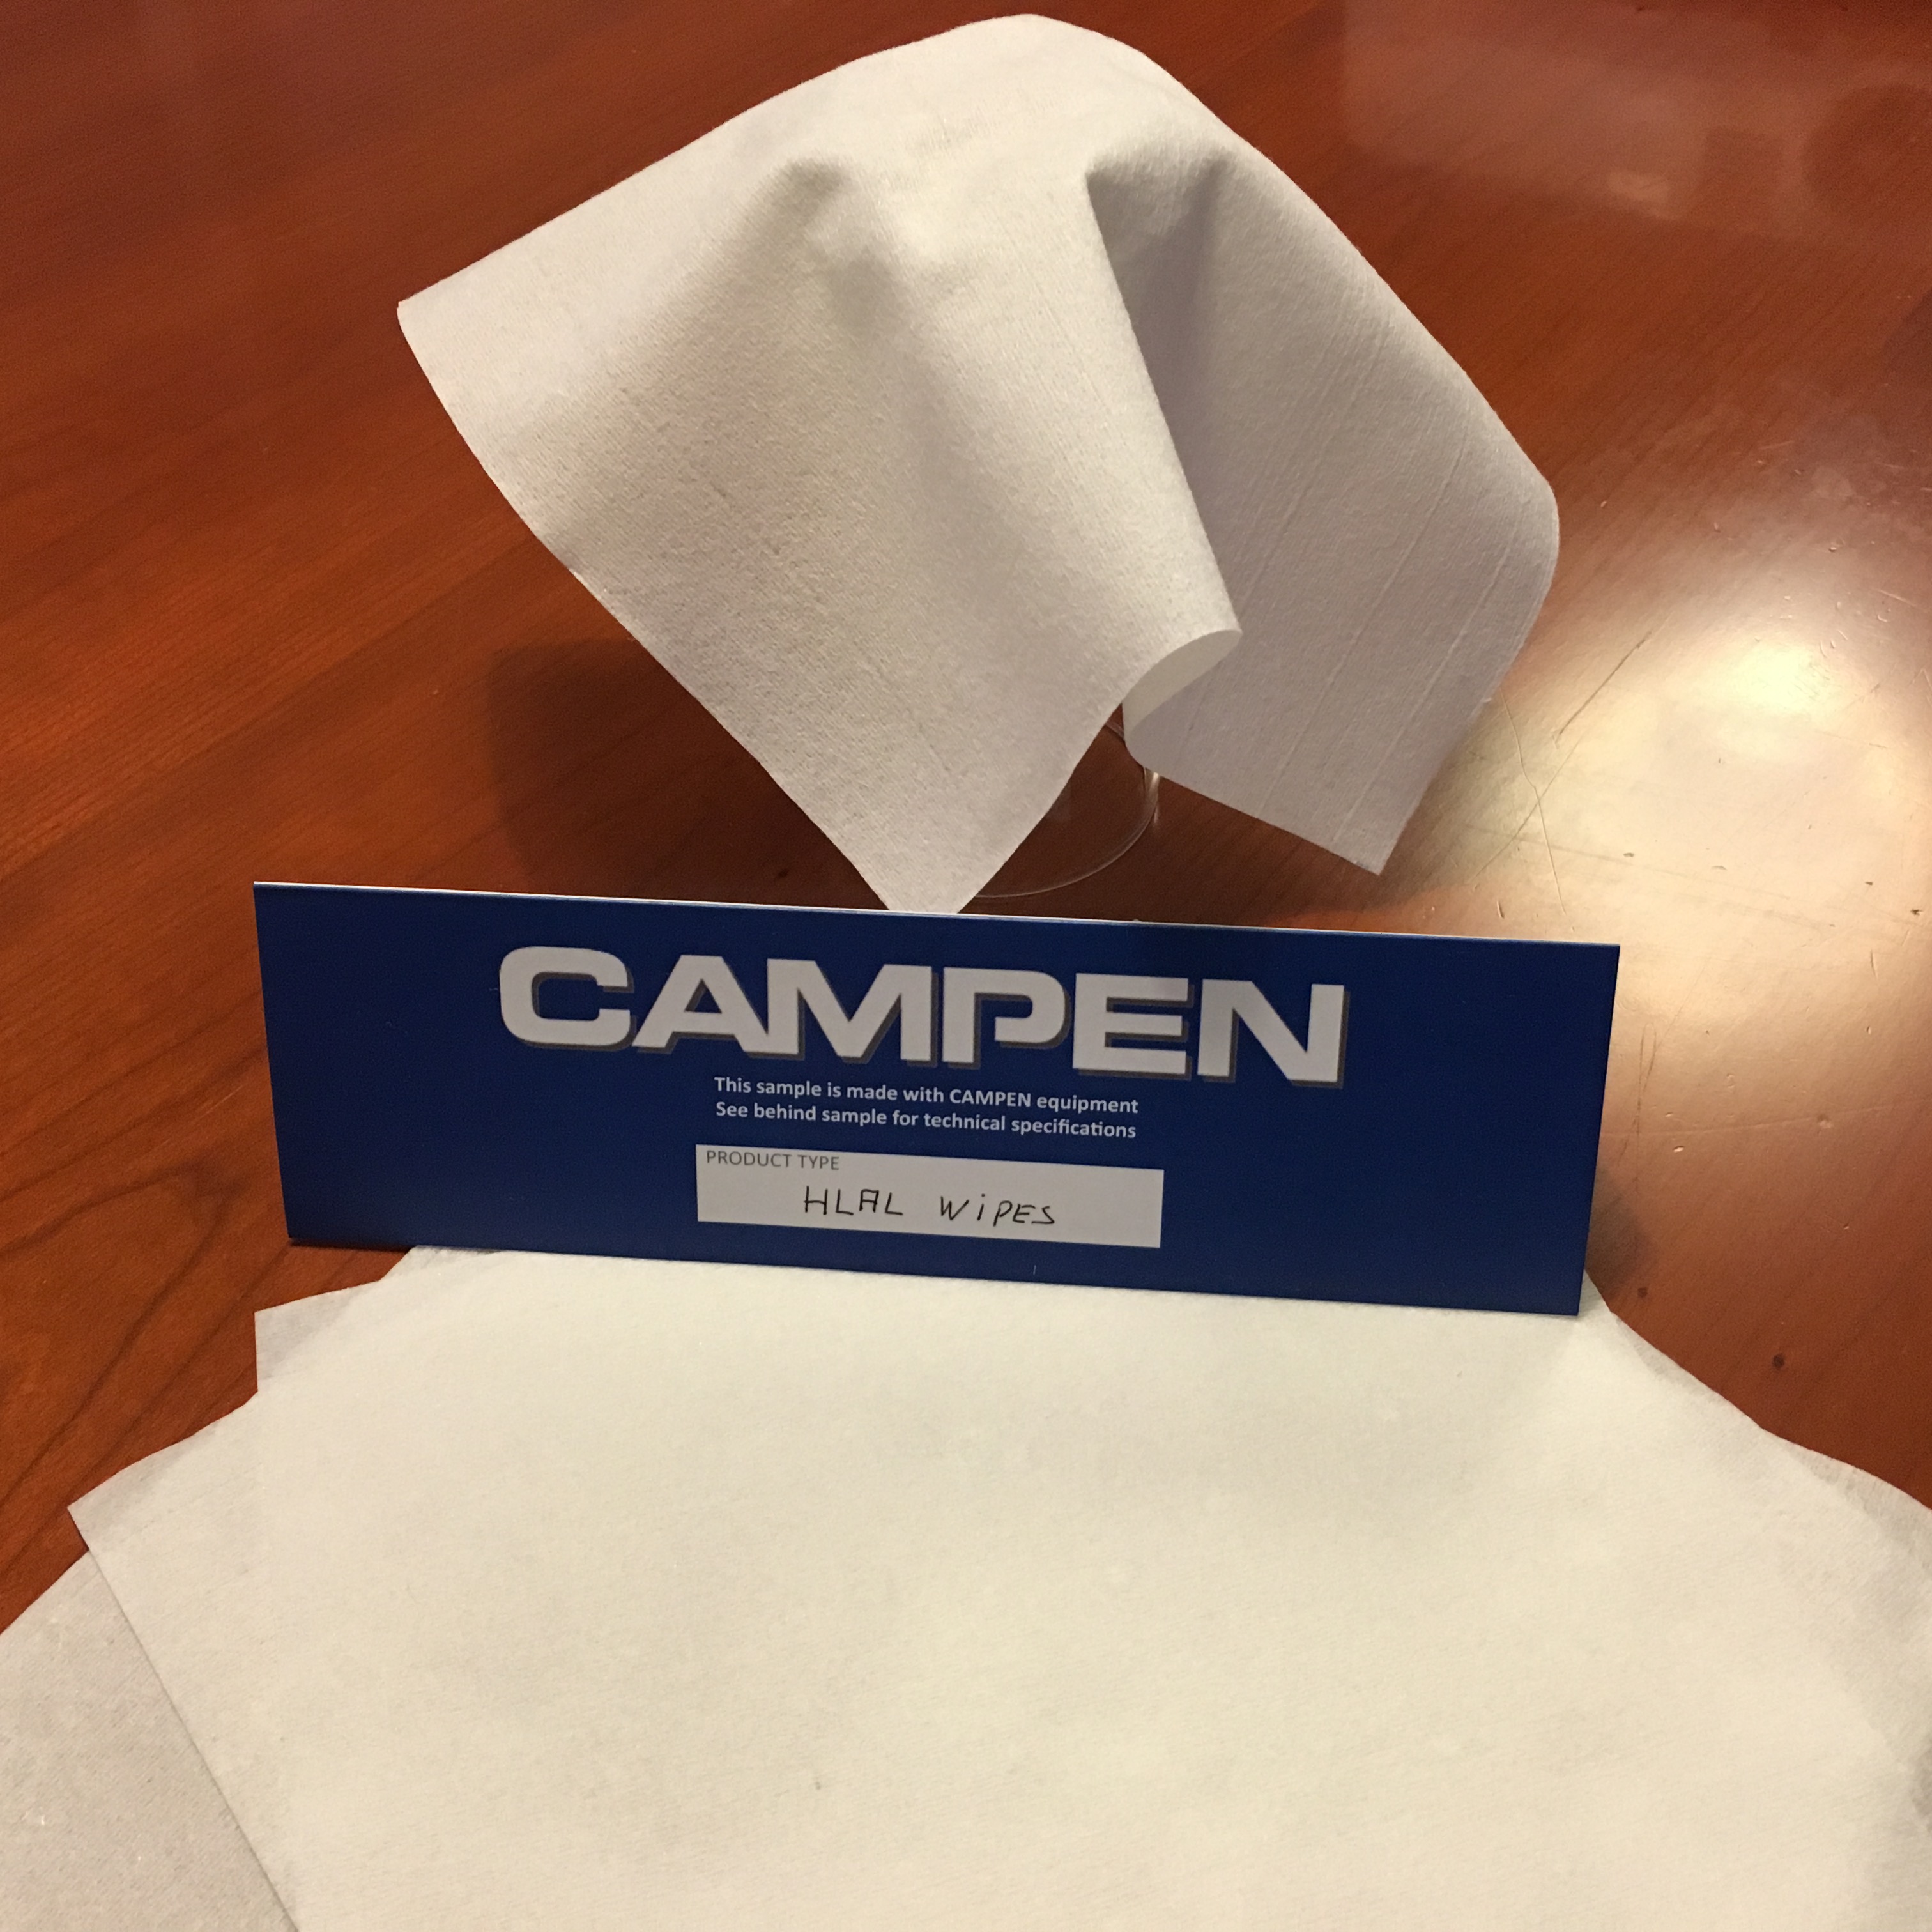 Campen Machinery A/S: Hydro Laced Airlaid Process (HLAL) nonwovens product for flushable wipes applications. © Campen Machinery A/S